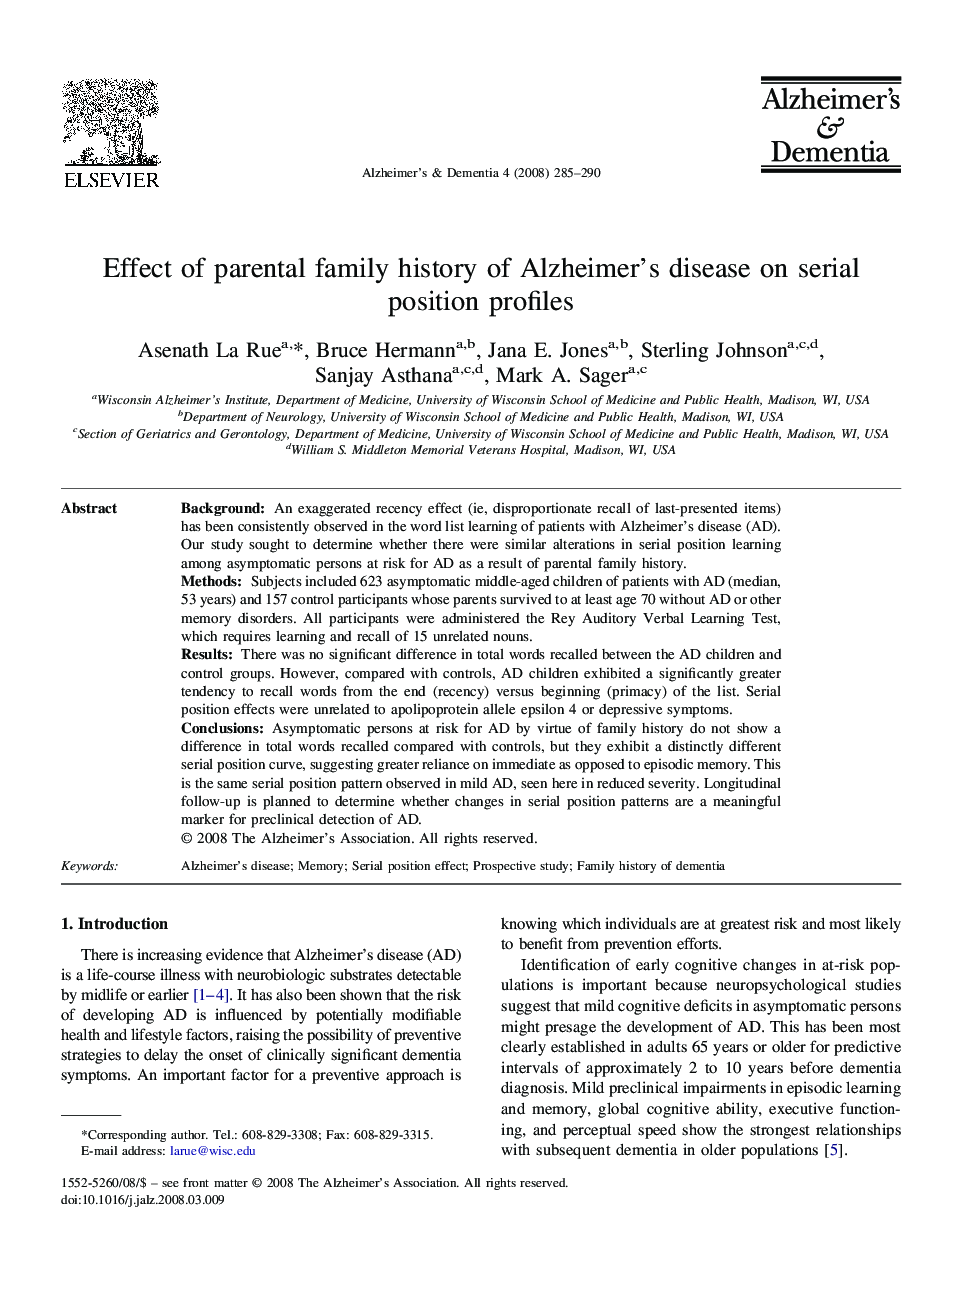 Featured articleEffect of parental family history of Alzheimer's disease on serial position profiles